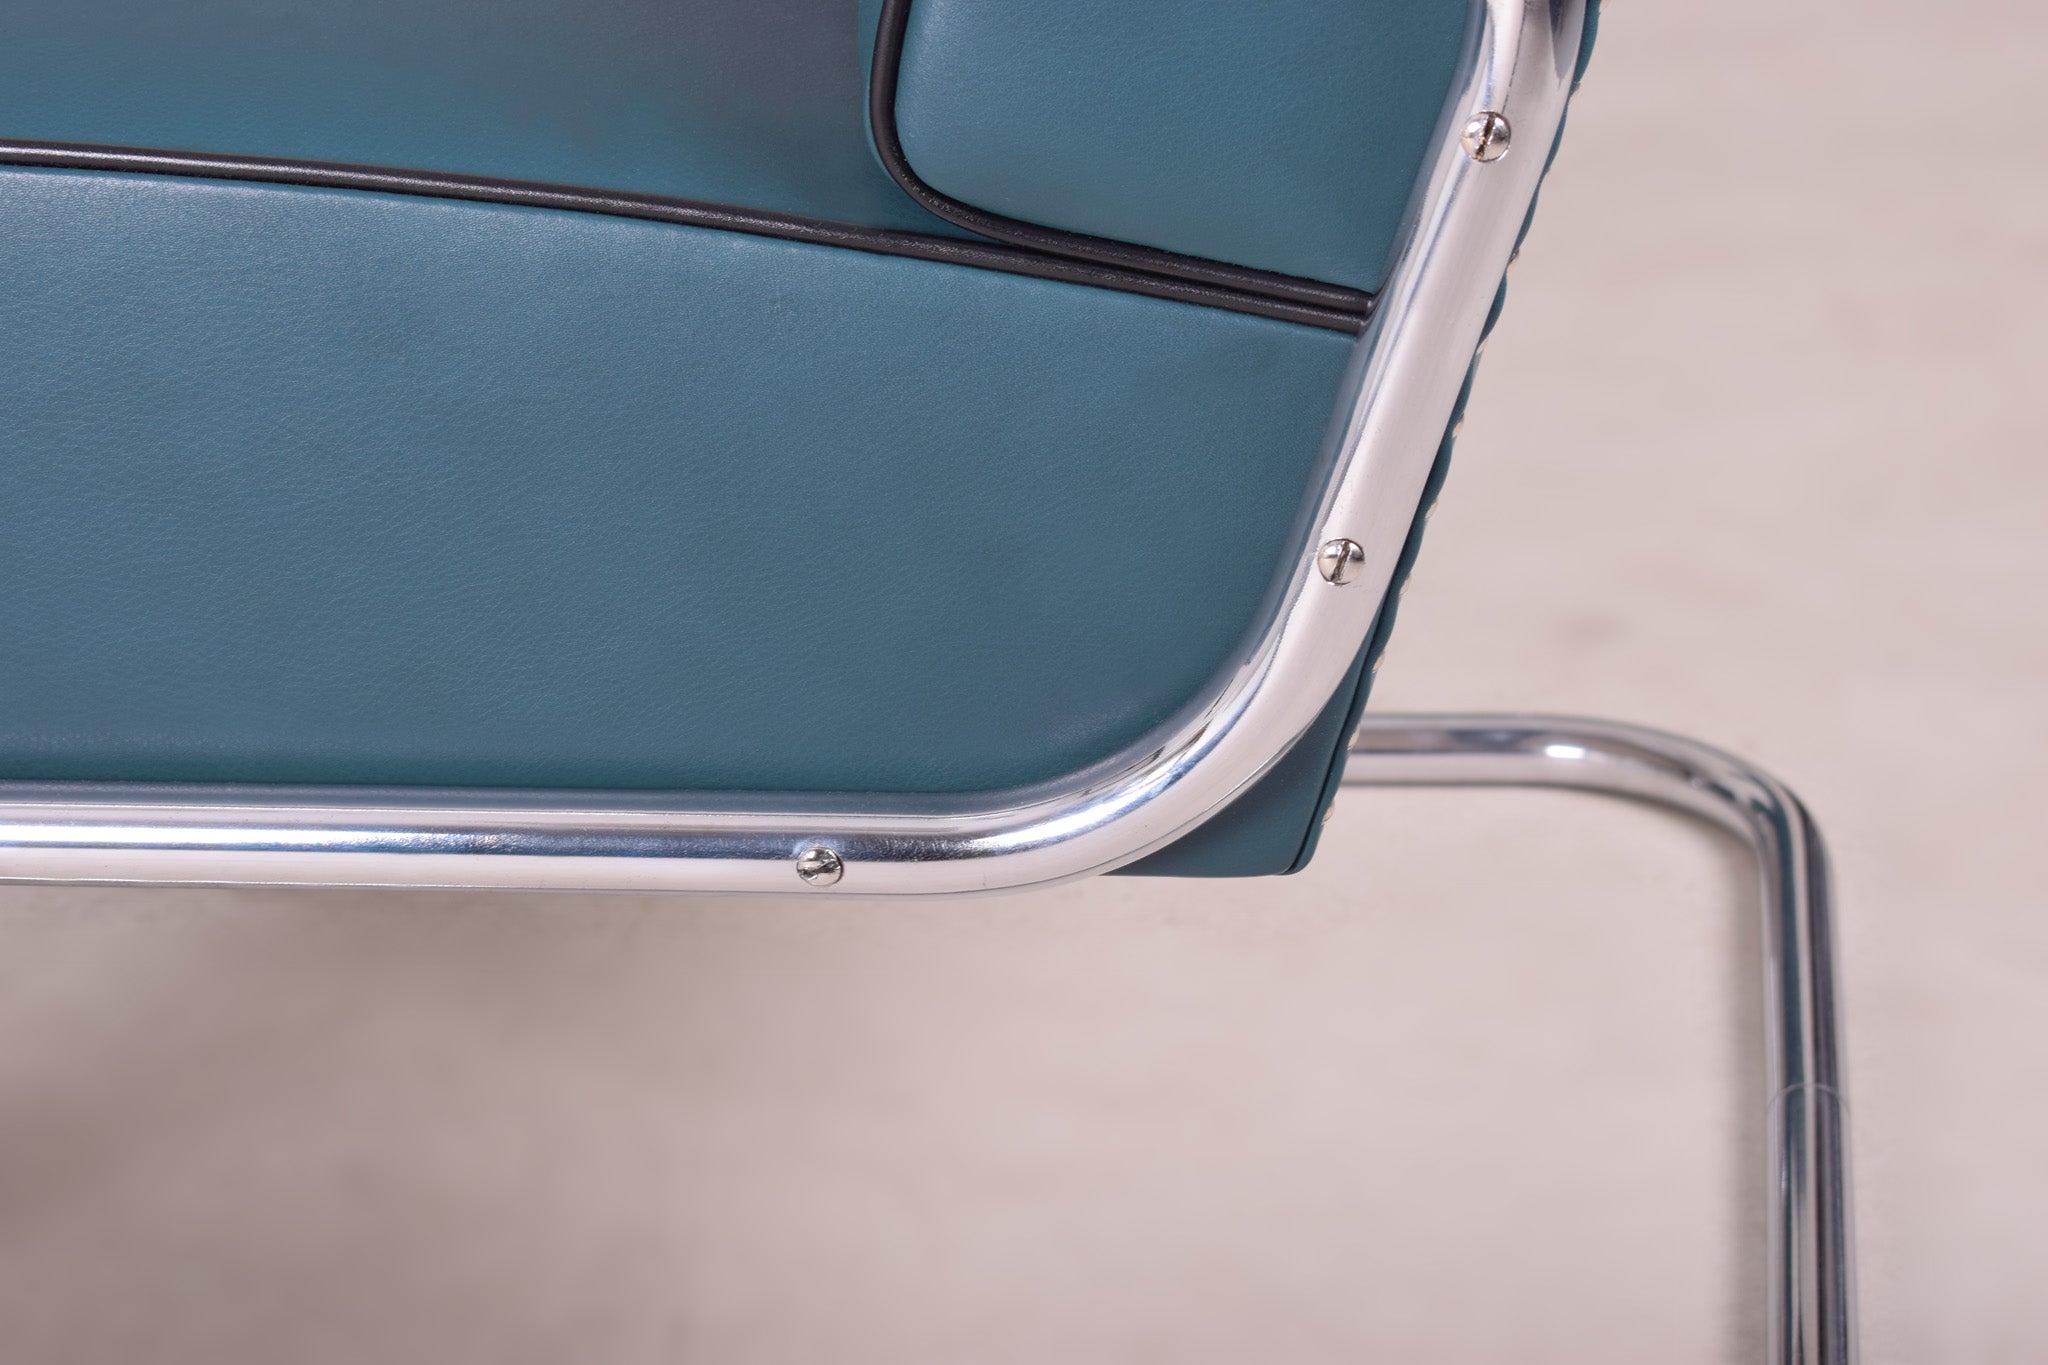 20th Century Bauhaus Tubular Chrome Armchairs by Mücke Melder, Restored Leather, 1930s For Sale